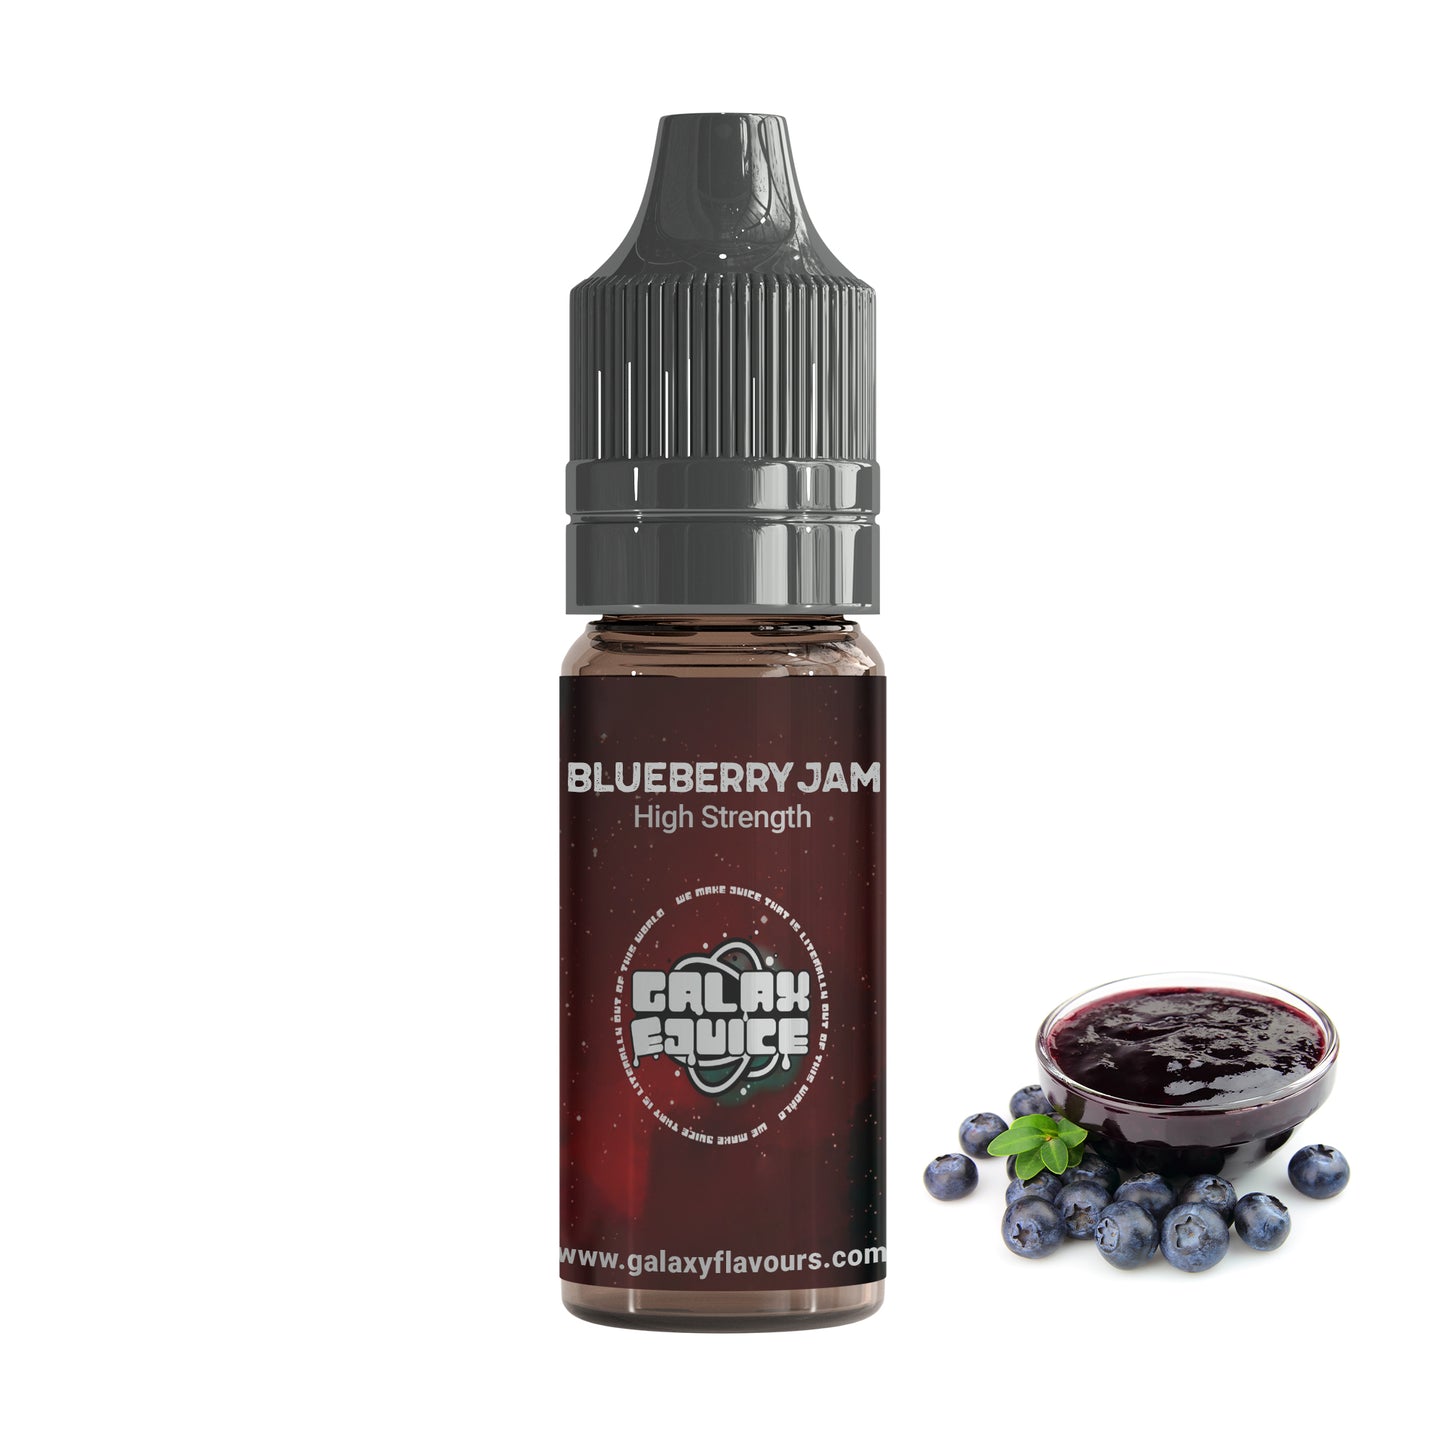 Blueberry Jam High Professional Strength Flavouring.